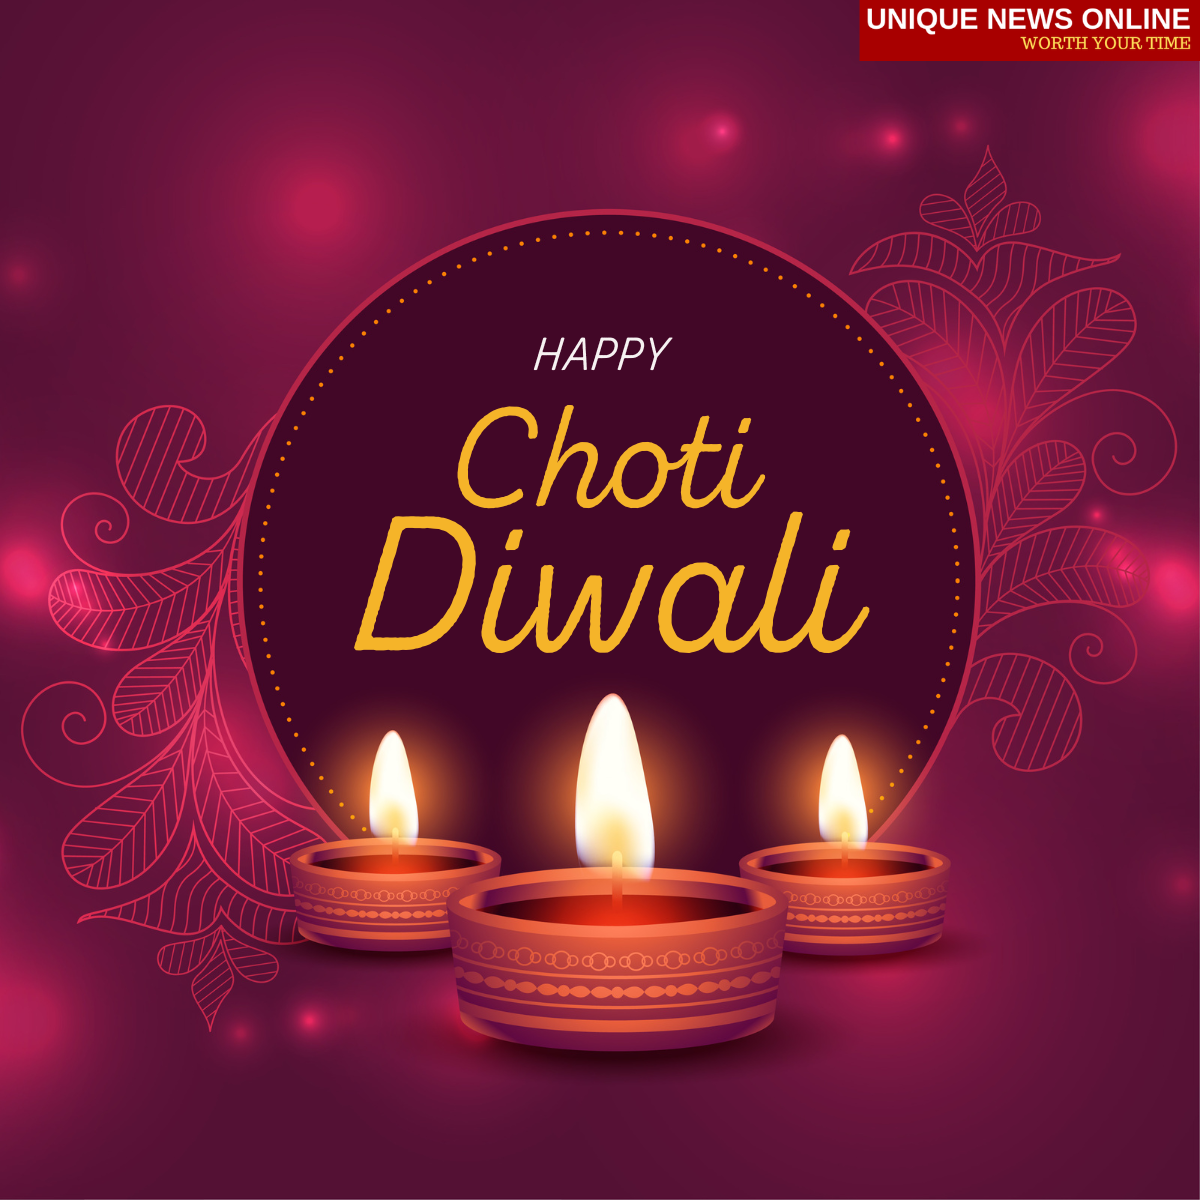 Choti Diwali 2022: Best Wishes, Greetings, Messages, HD Images, Quotes, and WhatsApp Status Video To Download For Free